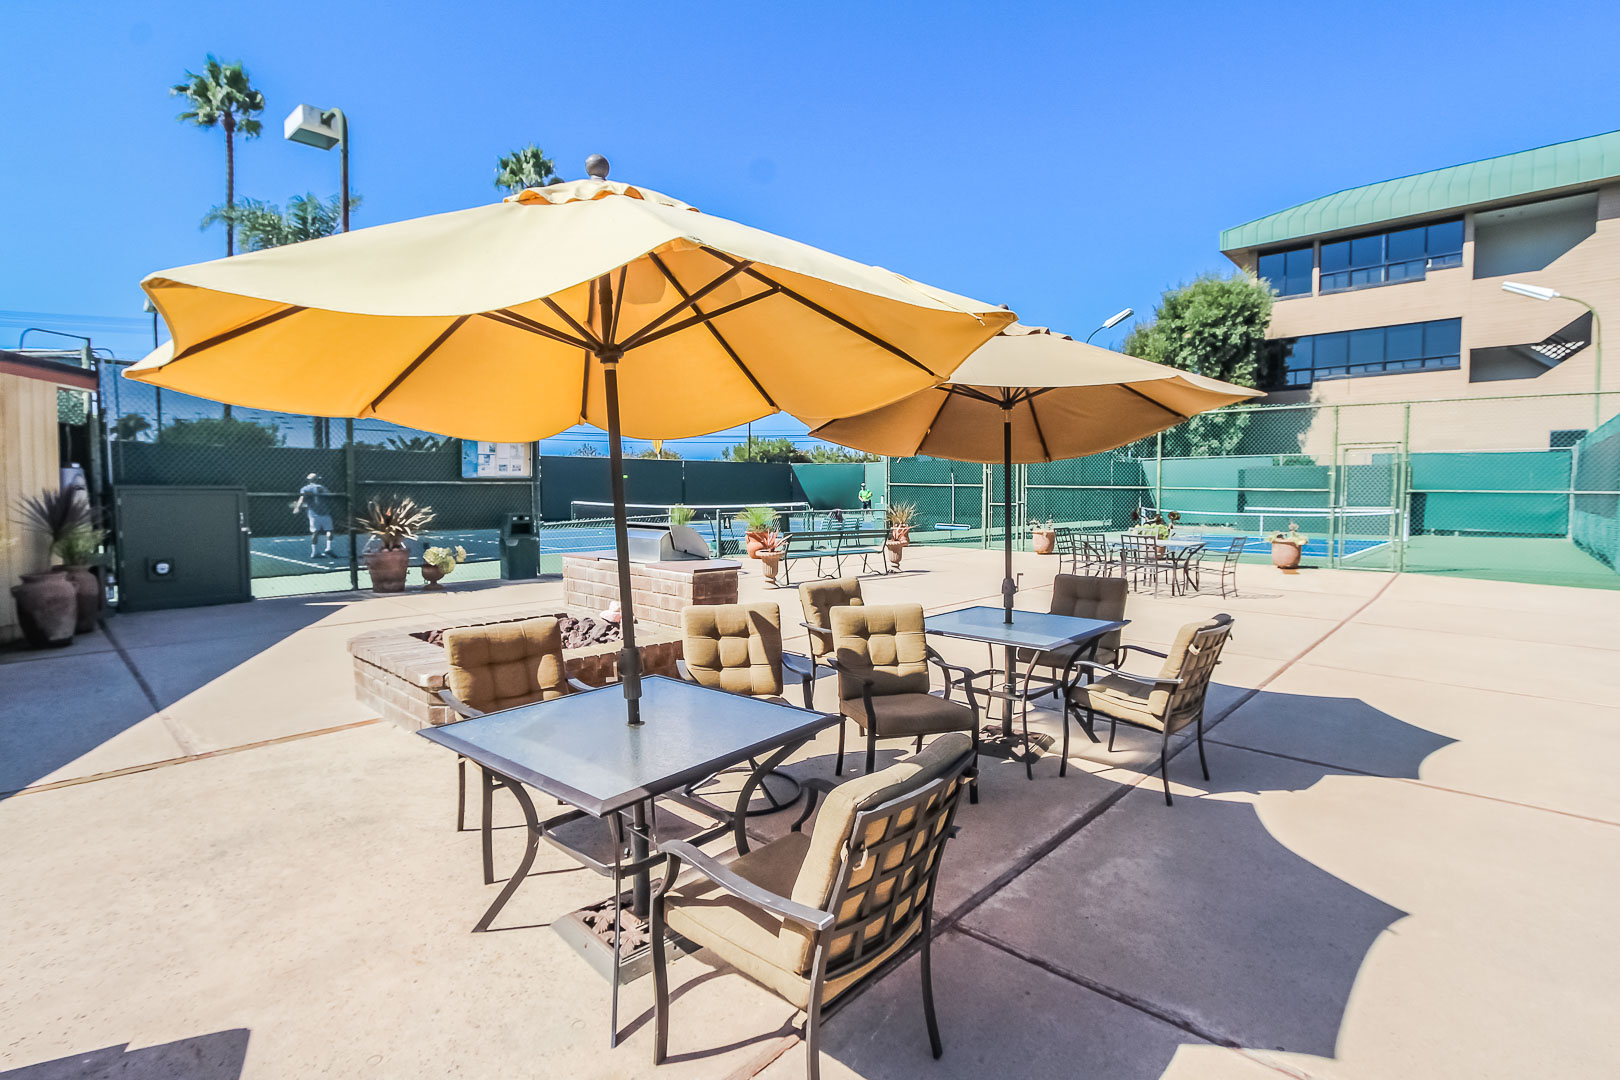 A lounging area next to the tennis courts at VRI's Winner Circle Resort in California.